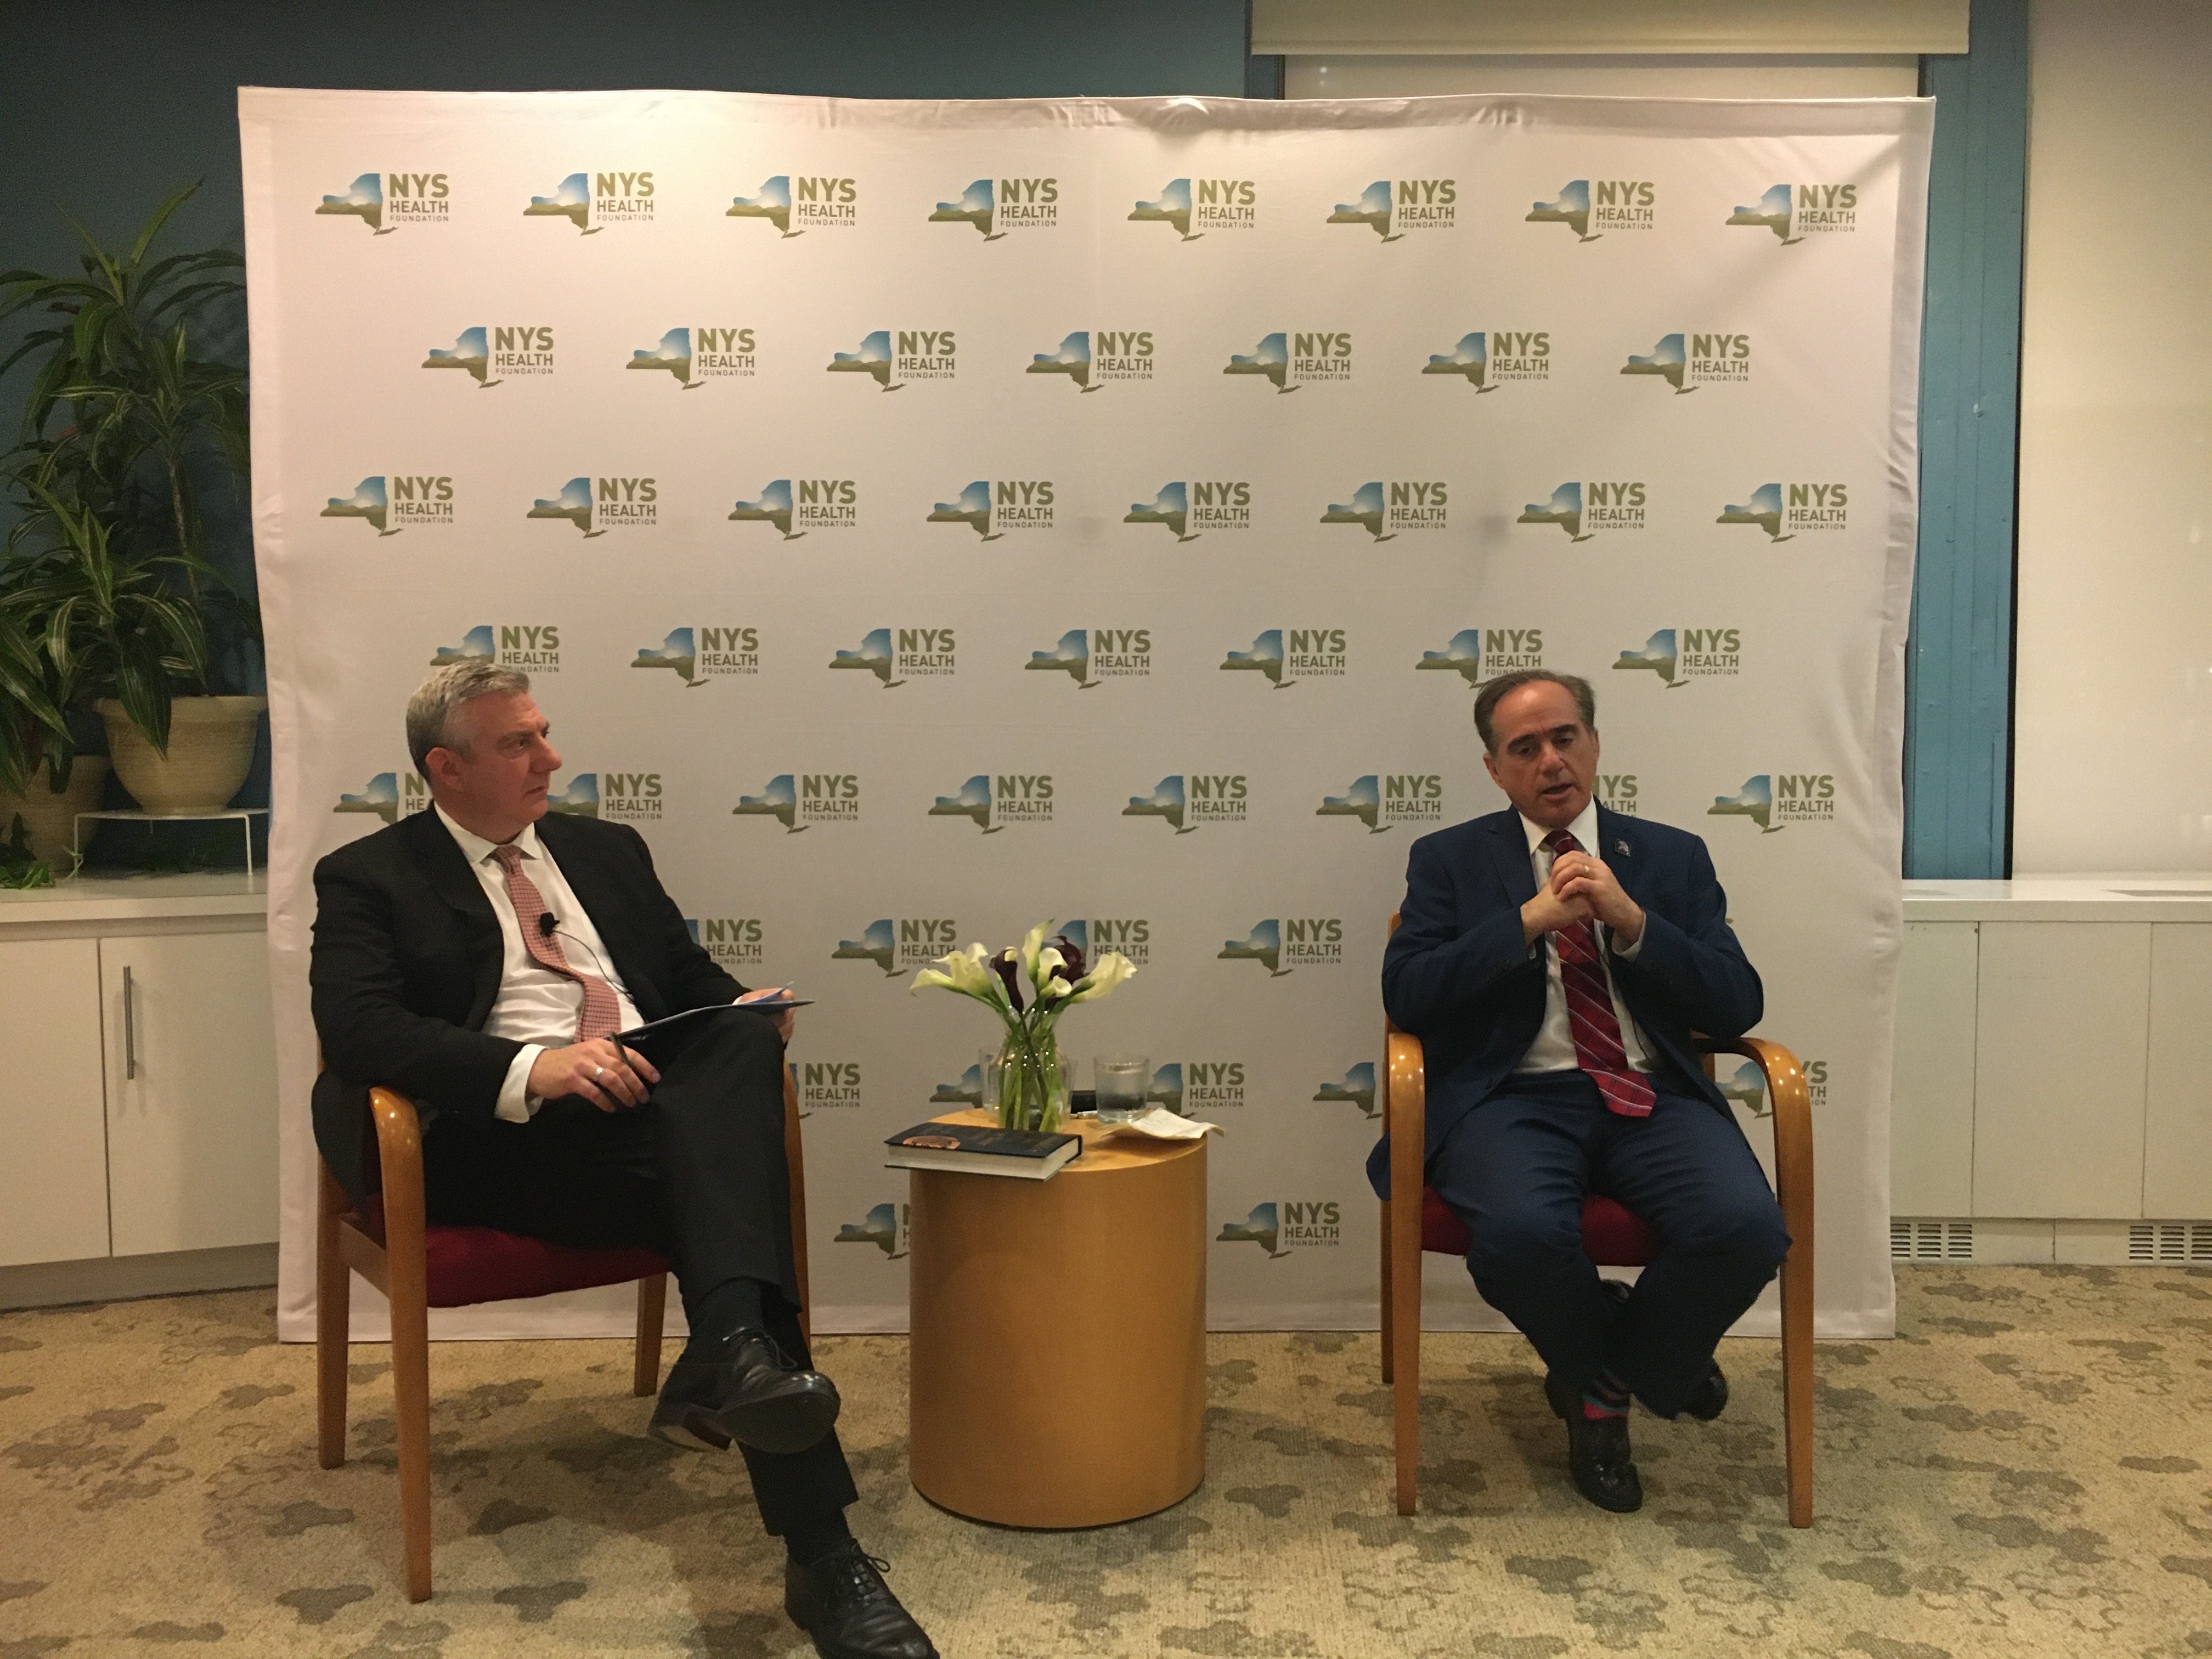 NYHealth President and CEO David Sandman sits with guest speaker David Shulkin, former VA Secretary, at an NYHealth event.